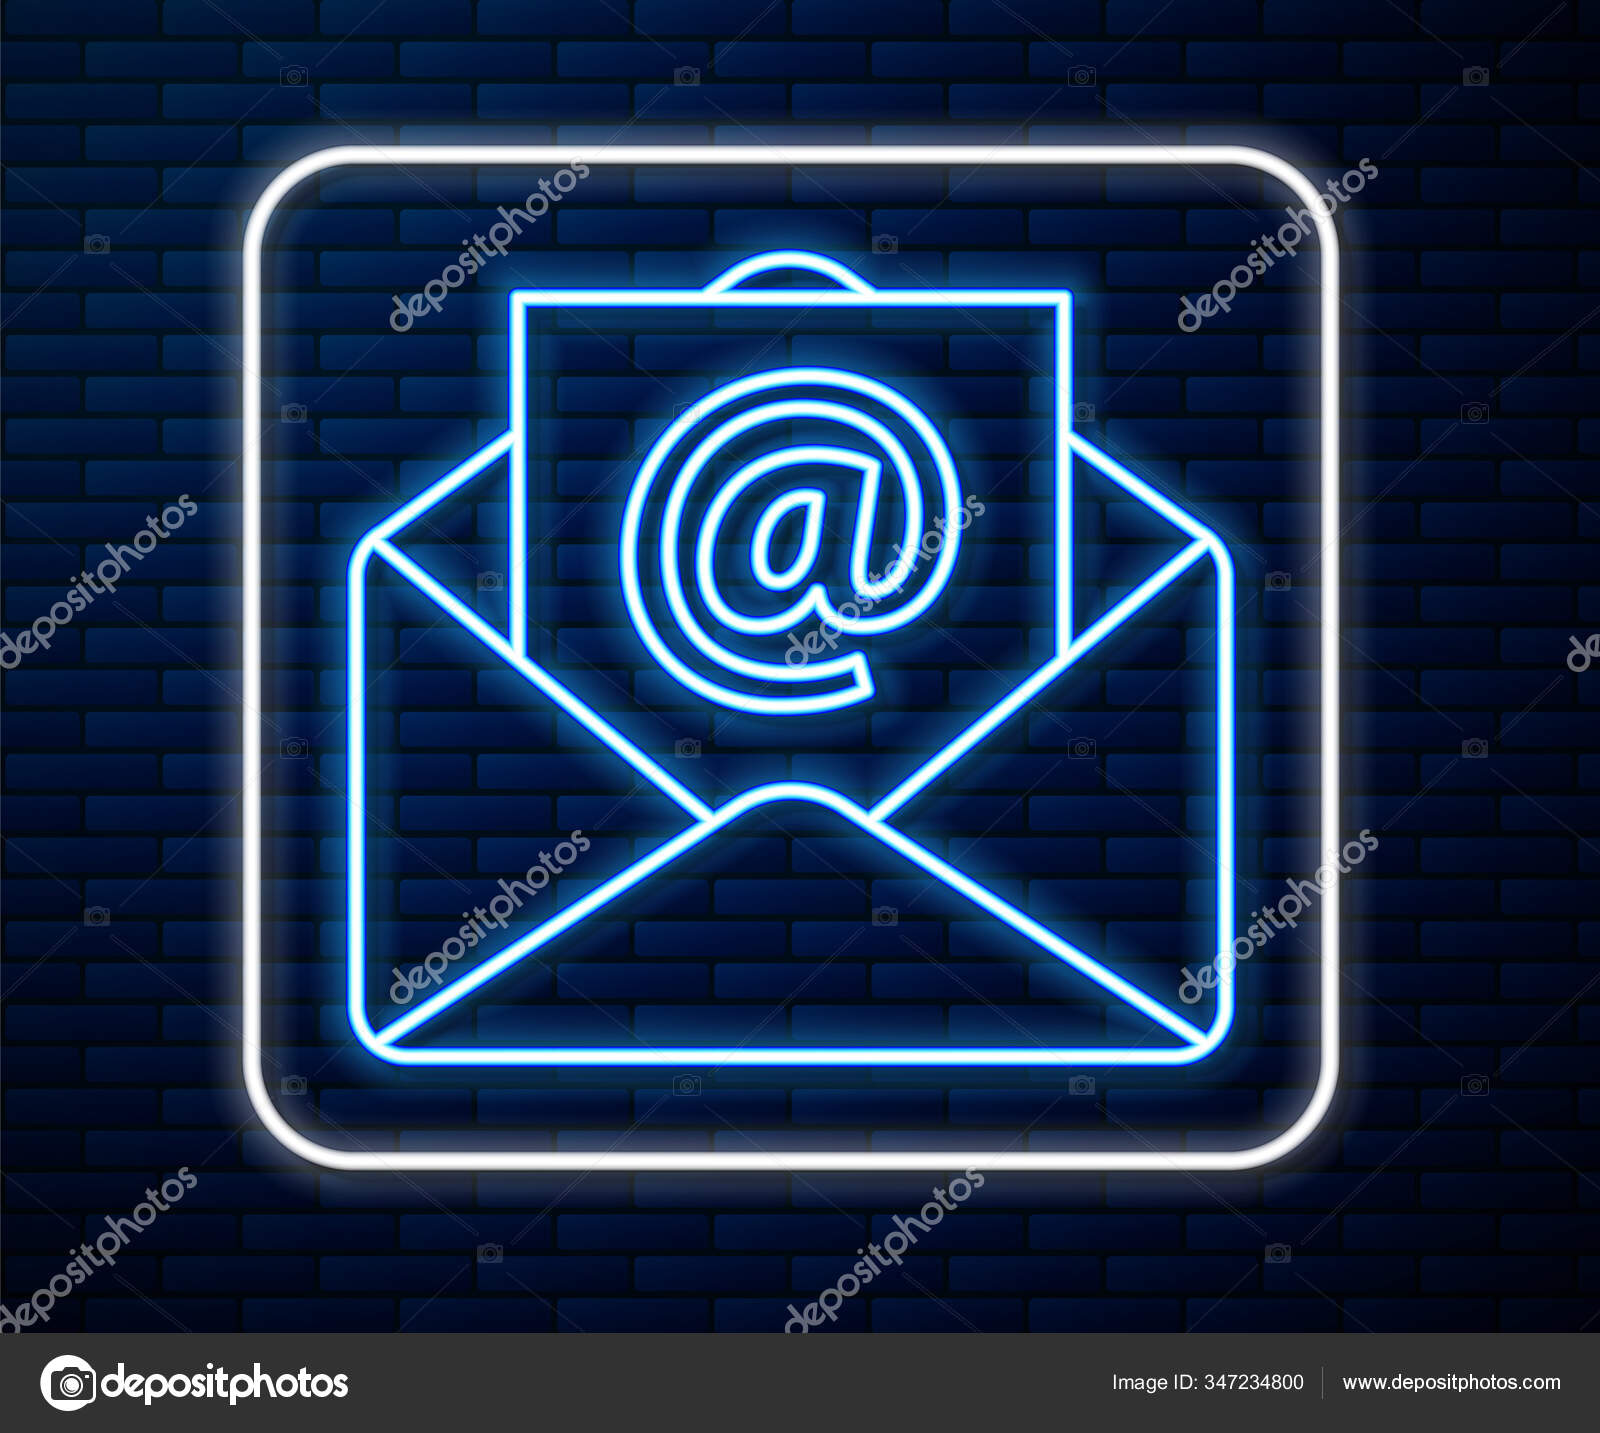 Glowing Neon Line Mail Mail Icon Isolated Brick Wall Background Vector Image By C Vectorstockvadim Vector Stock 347234800 512 x 512 png 20kb. https depositphotos com 347234800 stock illustration glowing neon line mail mail html